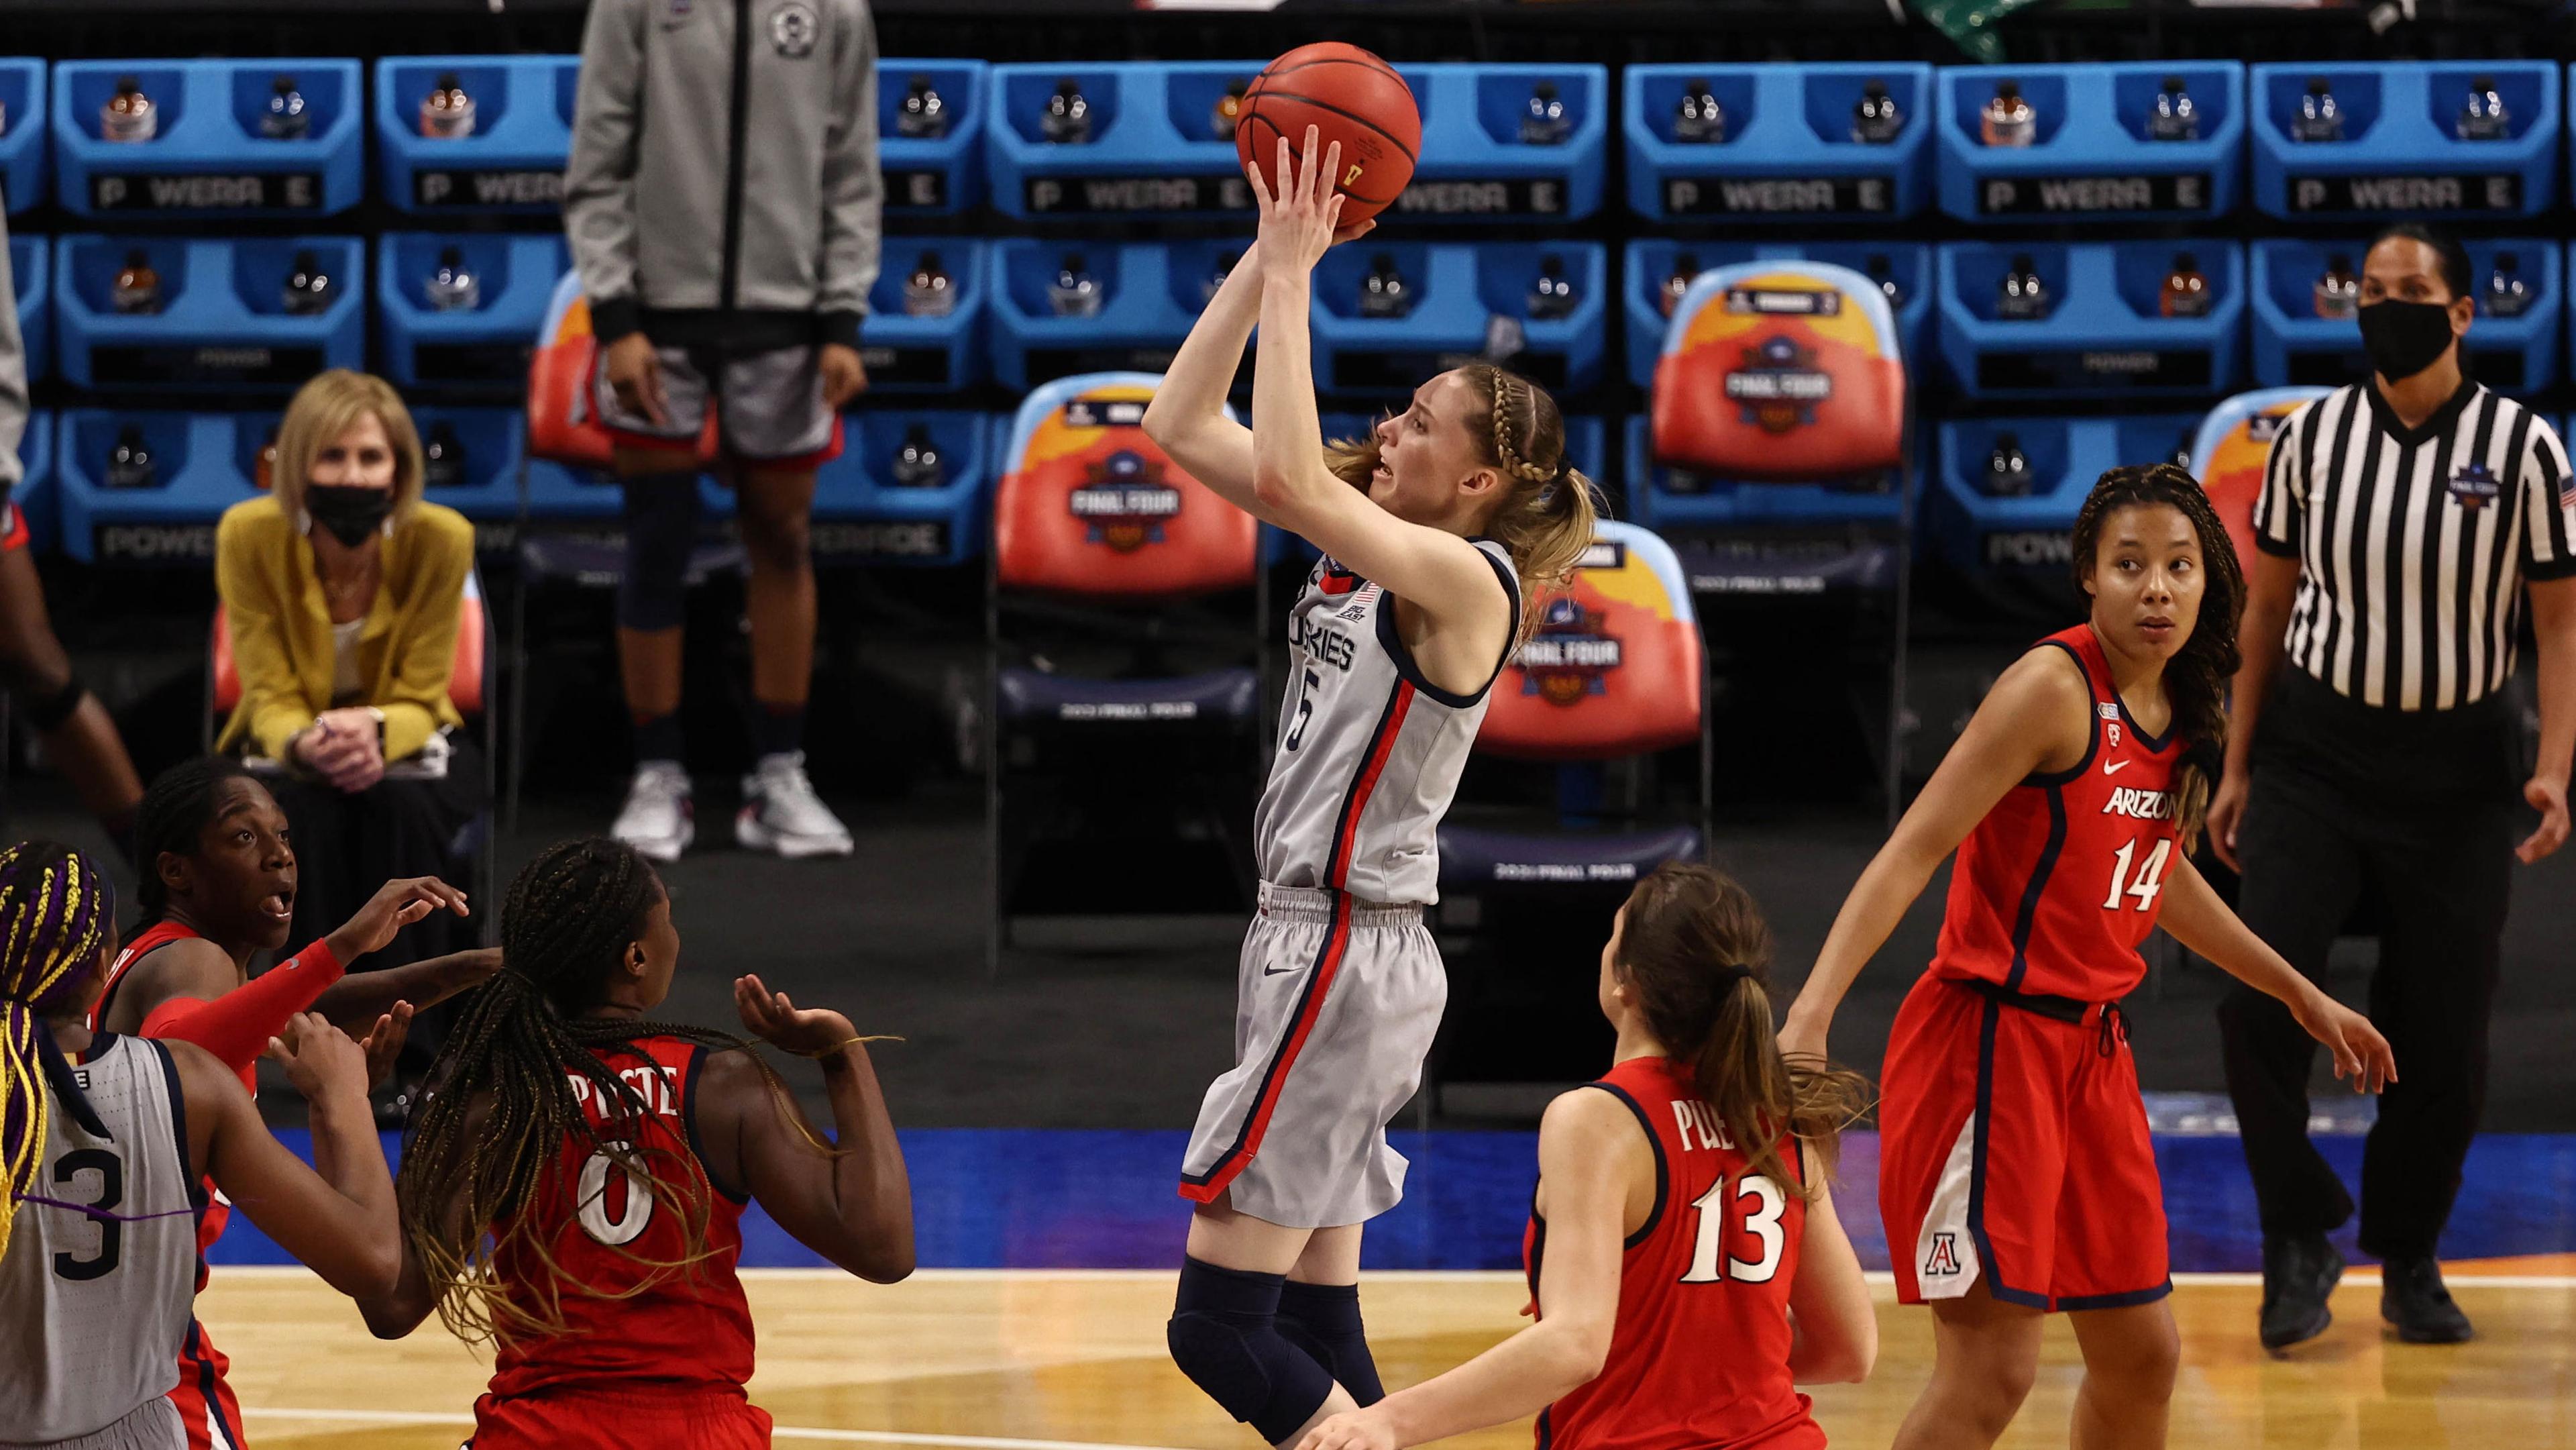 Apr 2, 2021; San Antonio, Texas, USA; UConn Huskies guard Paige Bueckers (5) shoots the ball over Arizona Wildcats forward Trinity Baptiste (0) during the second half in the national semifinals of the women's Final Four of the 2021 NCAA Tournament at Alamodome. / Troy Taormina-USA TODAY Sports